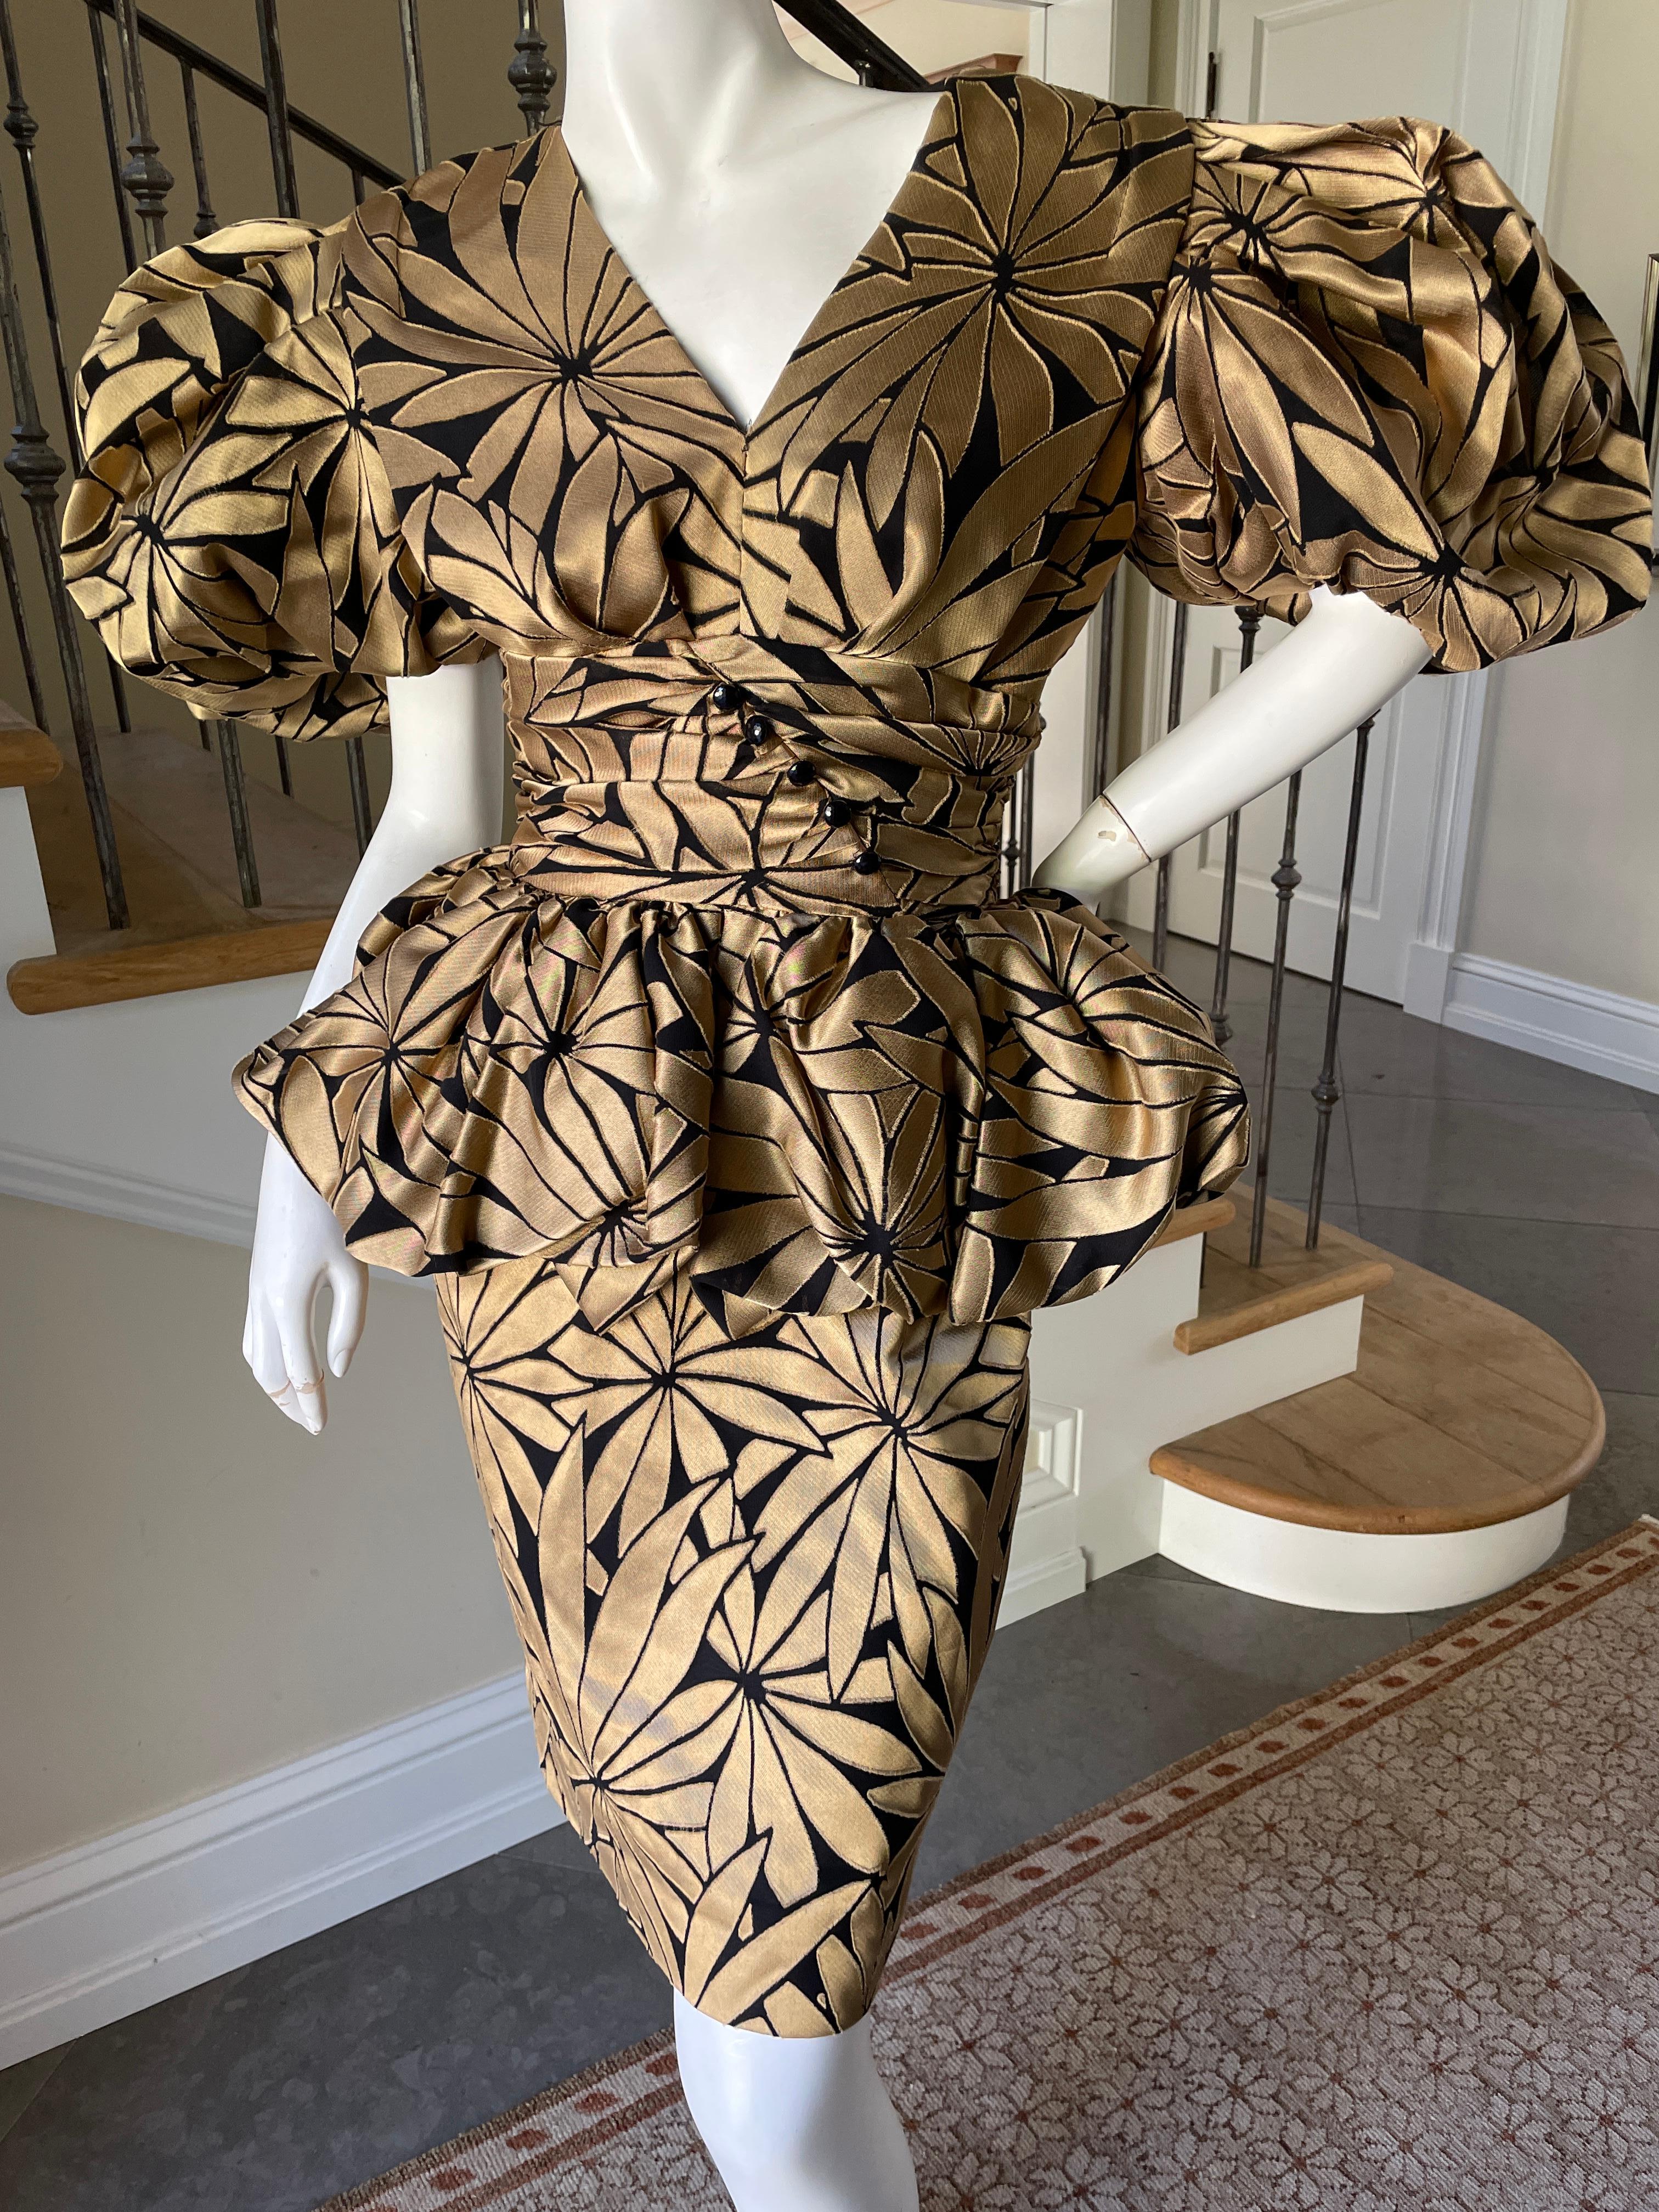 Victor Costa 1980's Gold Floral Peplum Evening Dress w Exaggerated Pouf Sleeves
This is so festive and fun.
No size tag, I would estimate it size 6
Bust 32